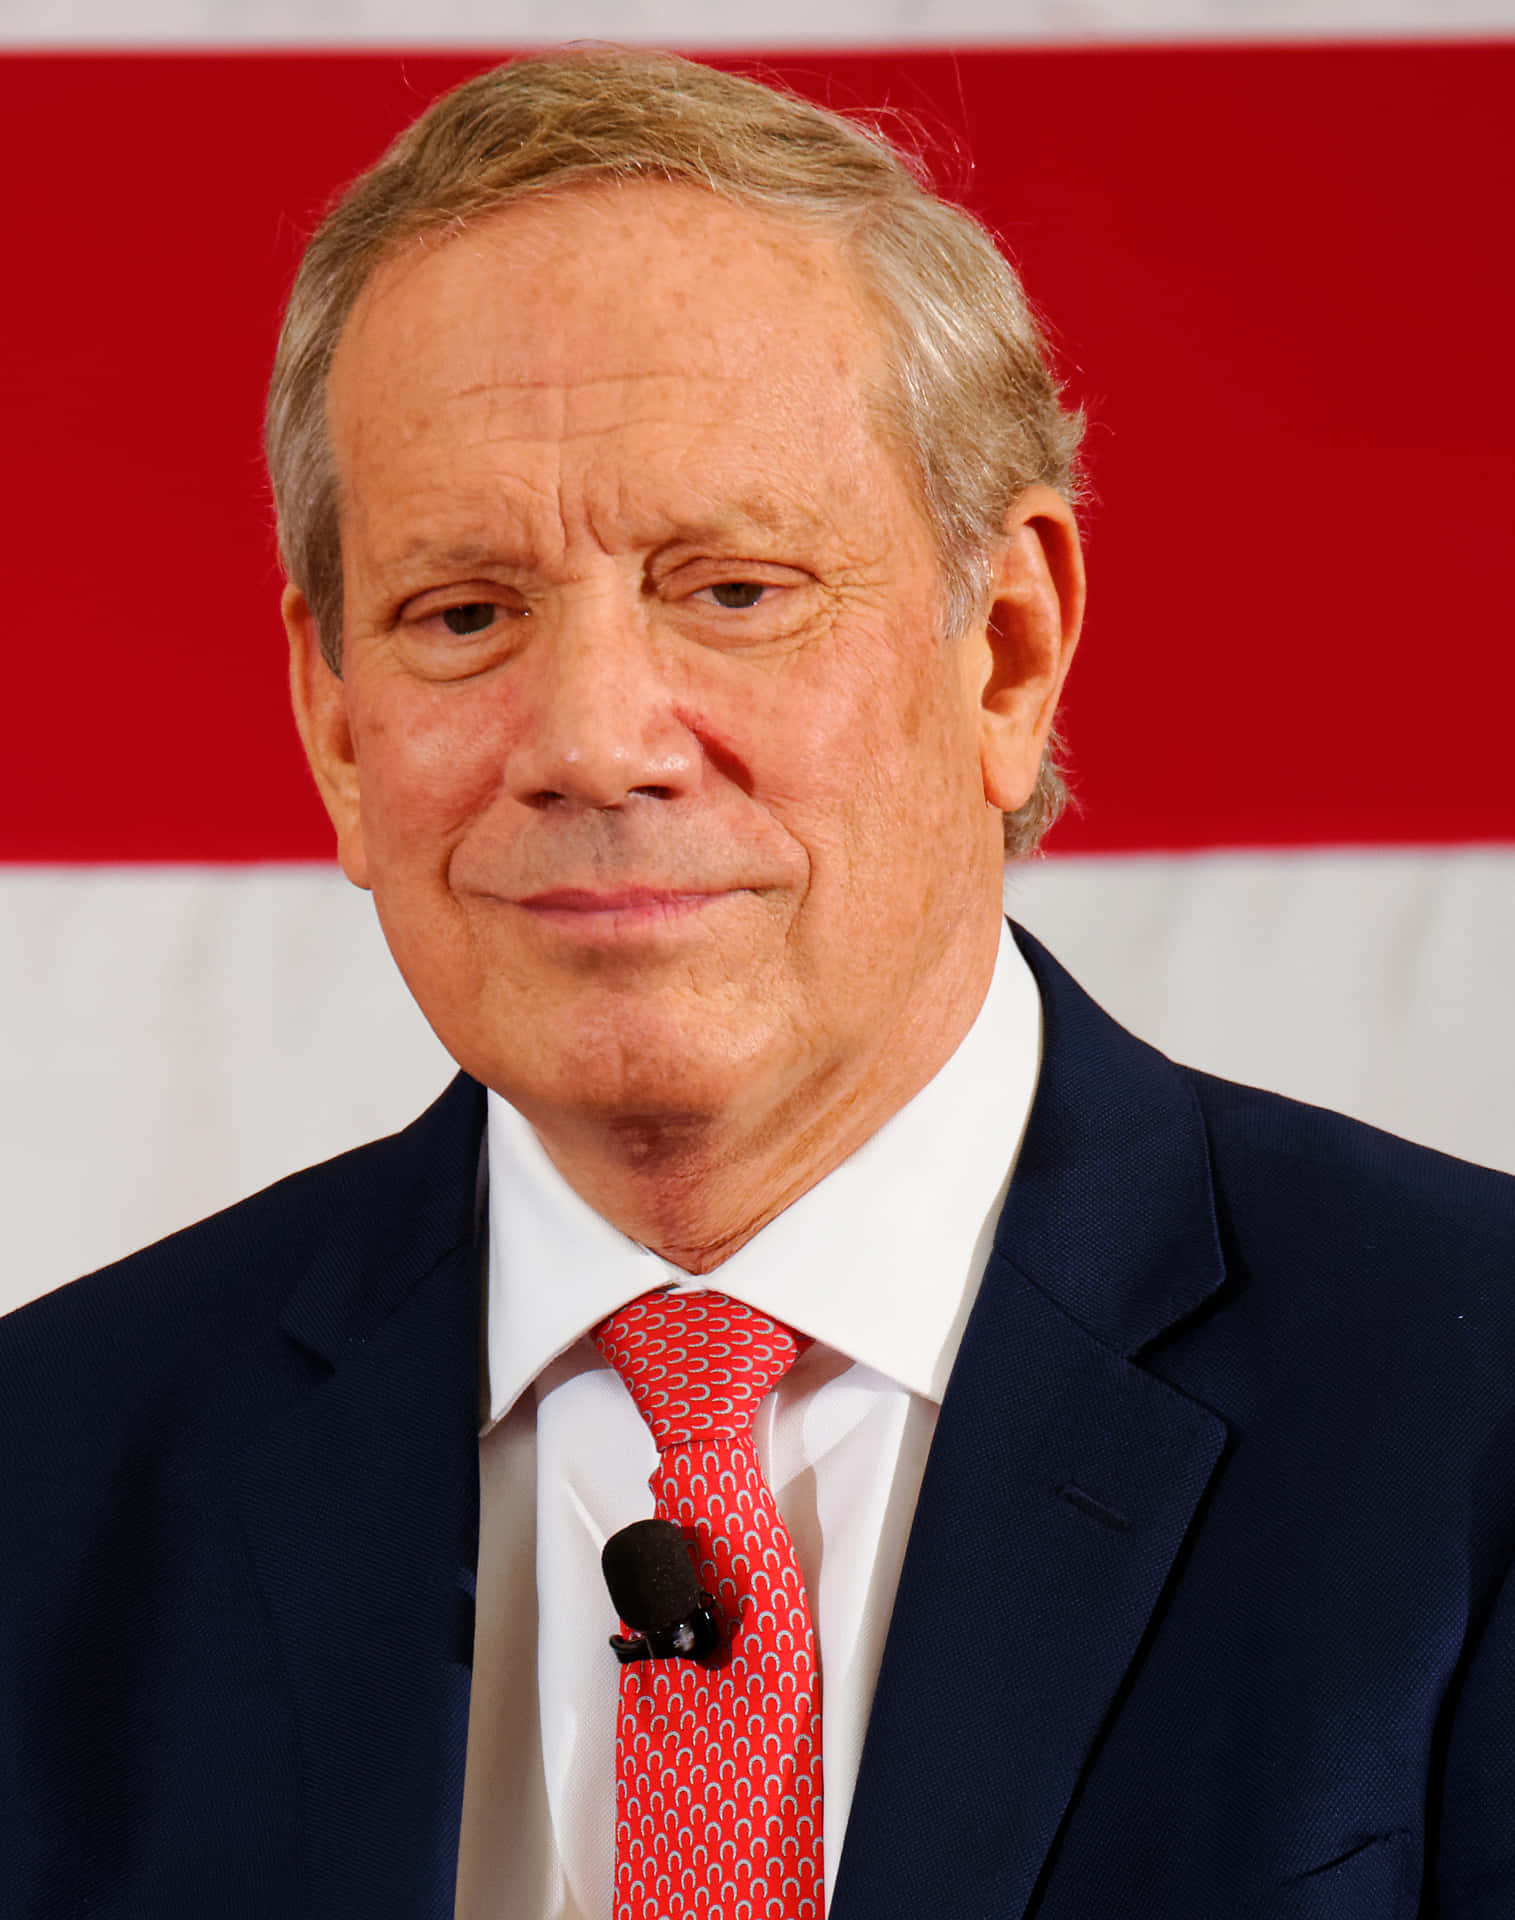 Former Governor George Pataki in a Well-Crafted Suit and Tie Wallpaper